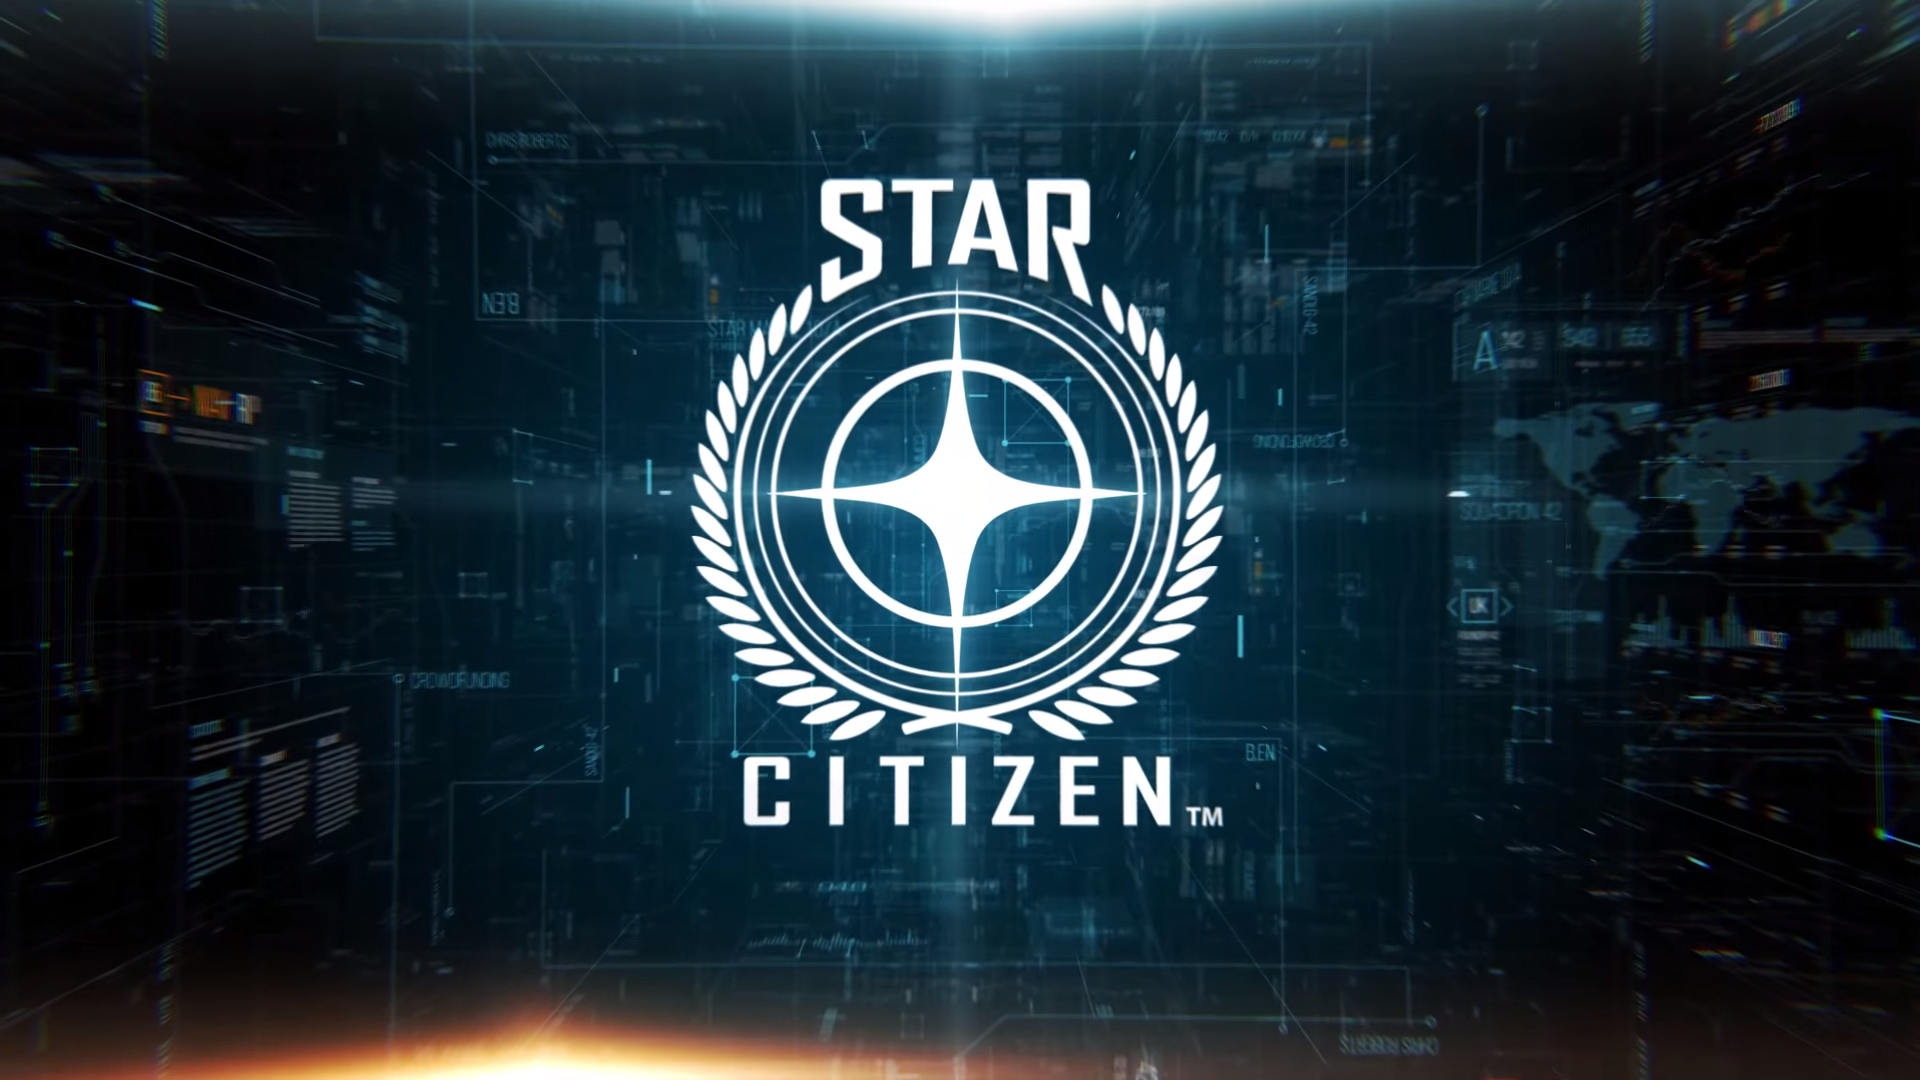 General 1920x1080 Star Citizen science fiction PC gaming